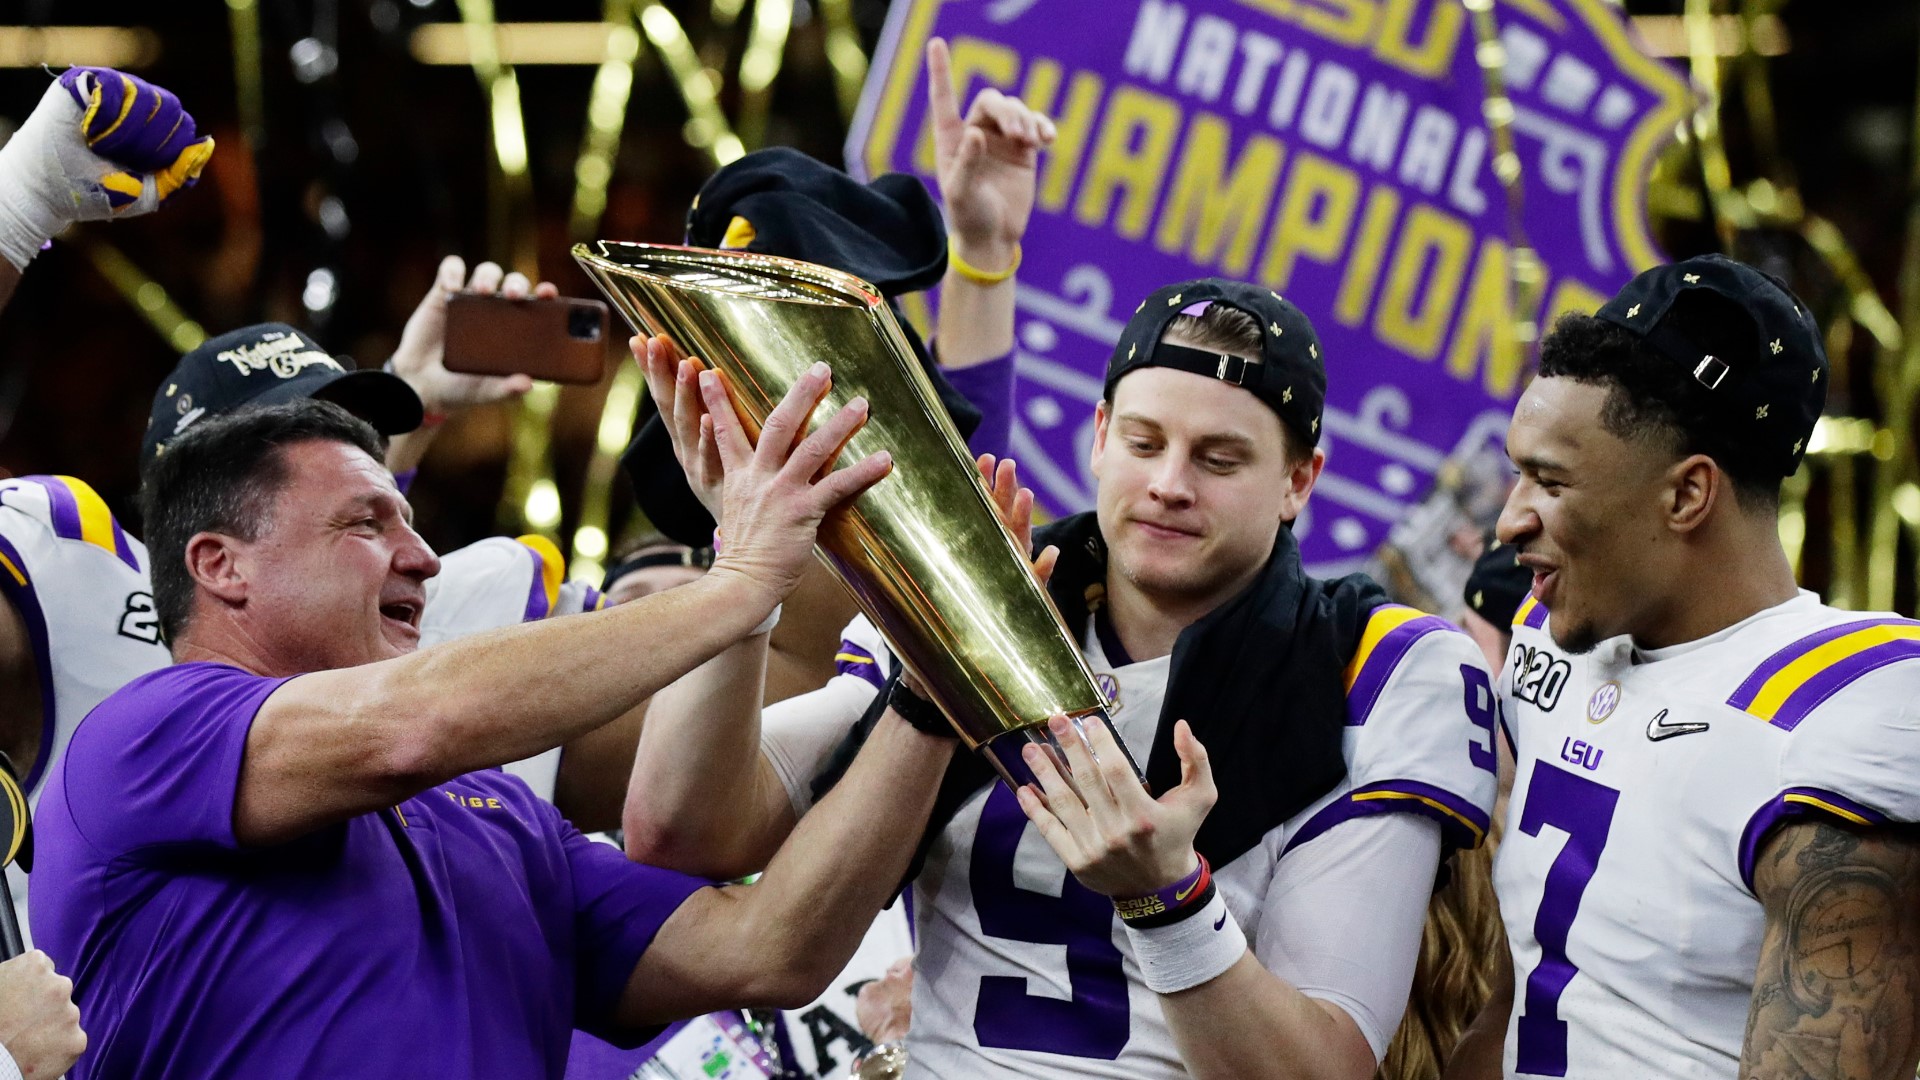 Want a photo with LSU's National Championship Trophy? Here's your